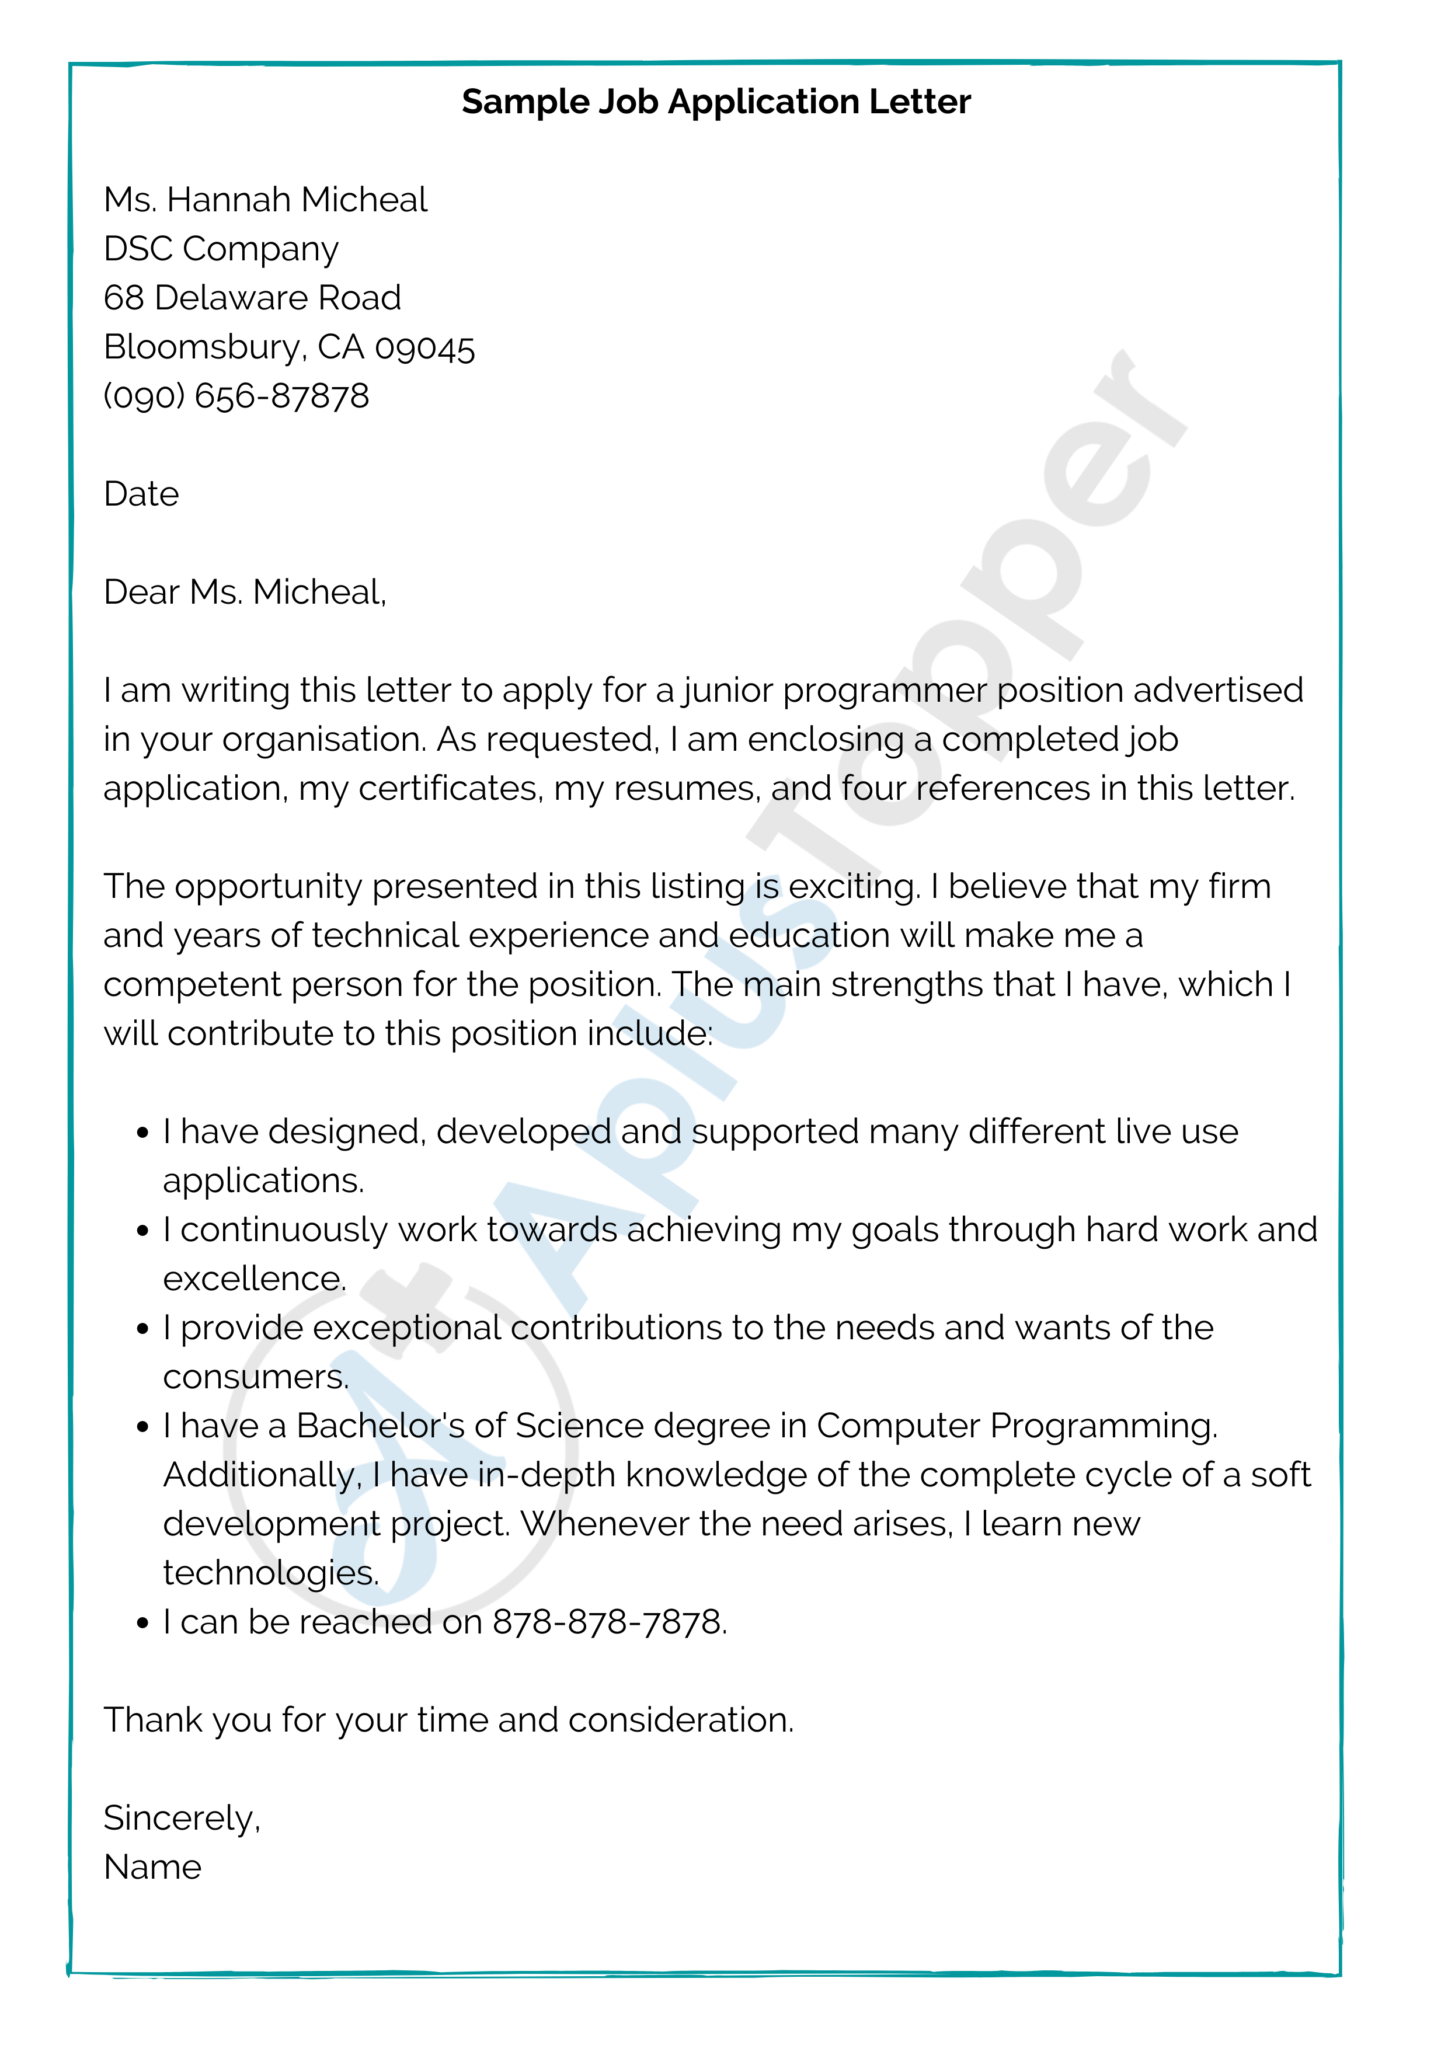 www how to write letter of application